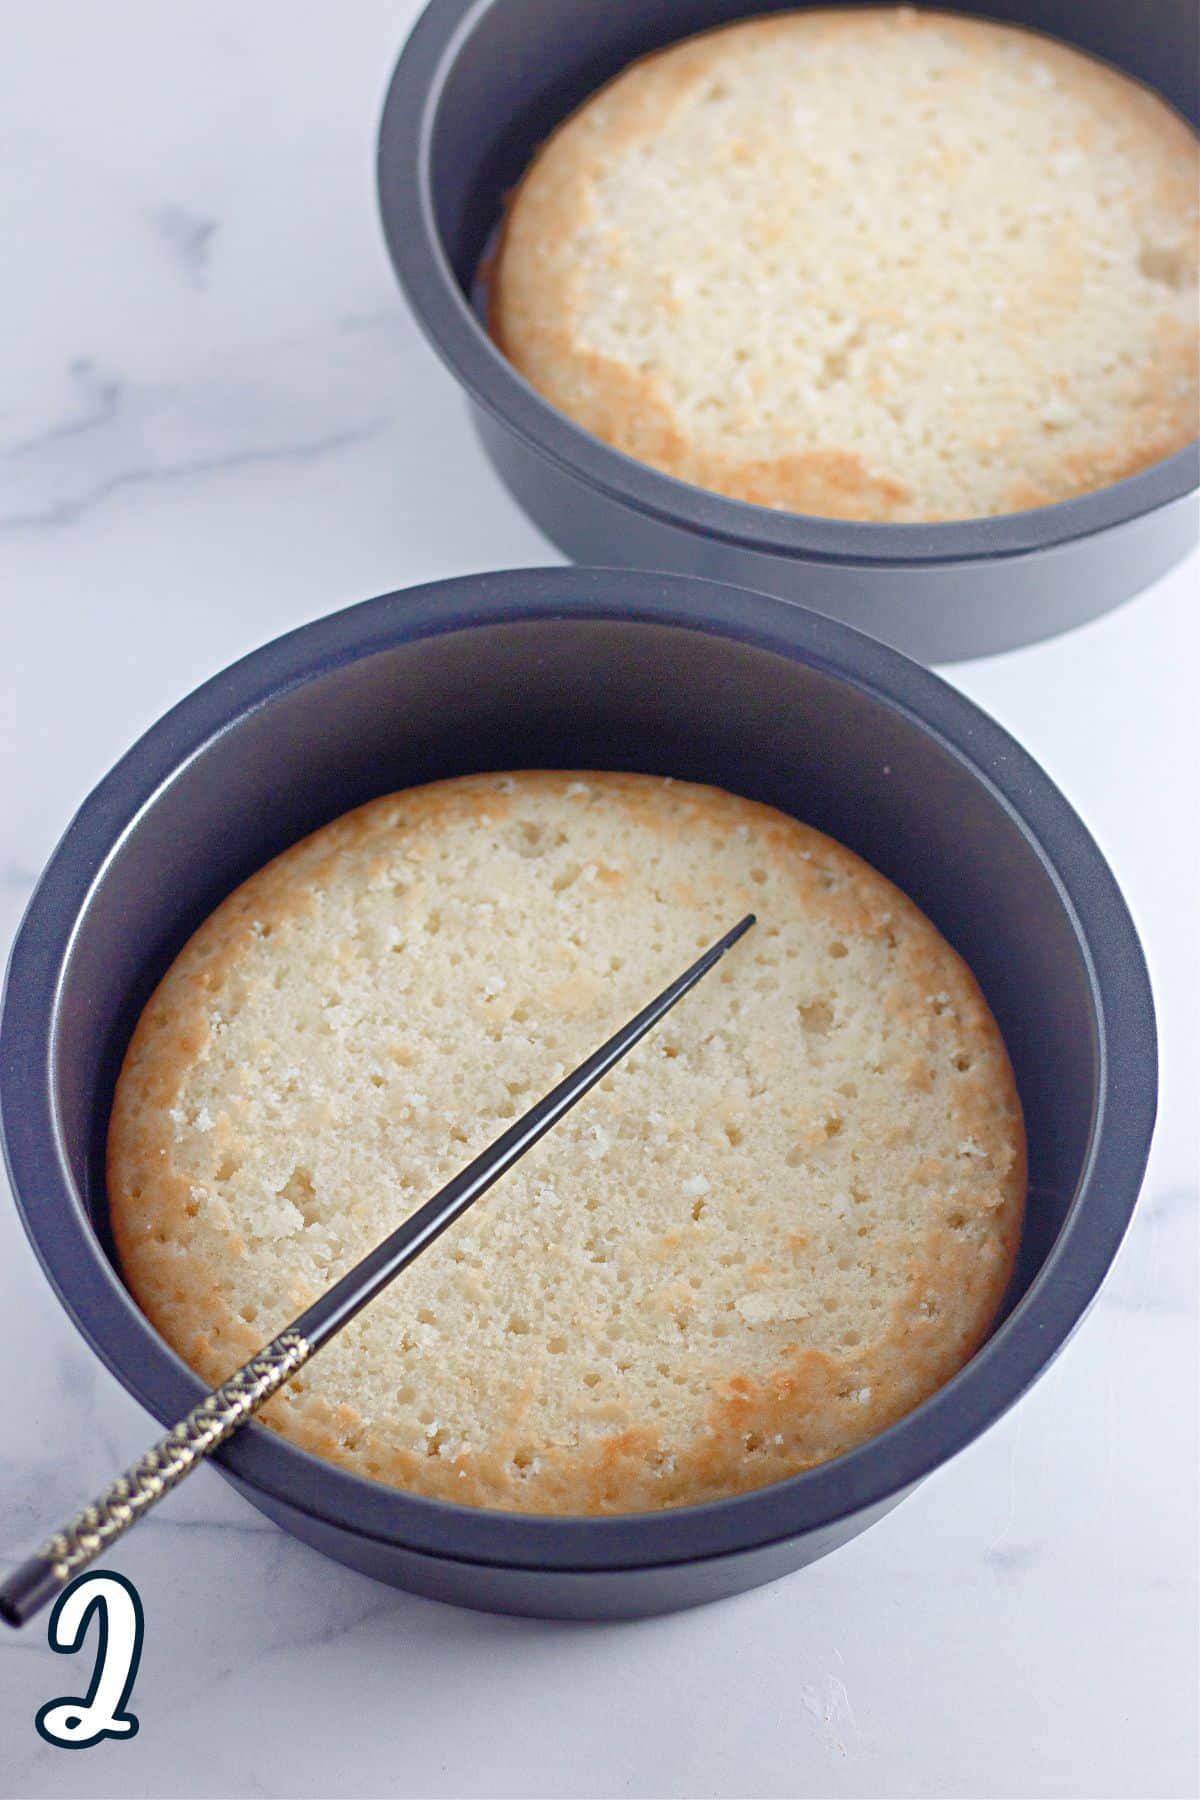 Two baked white cakes still in the pan with a chop stick used to poke holes in the cakes.